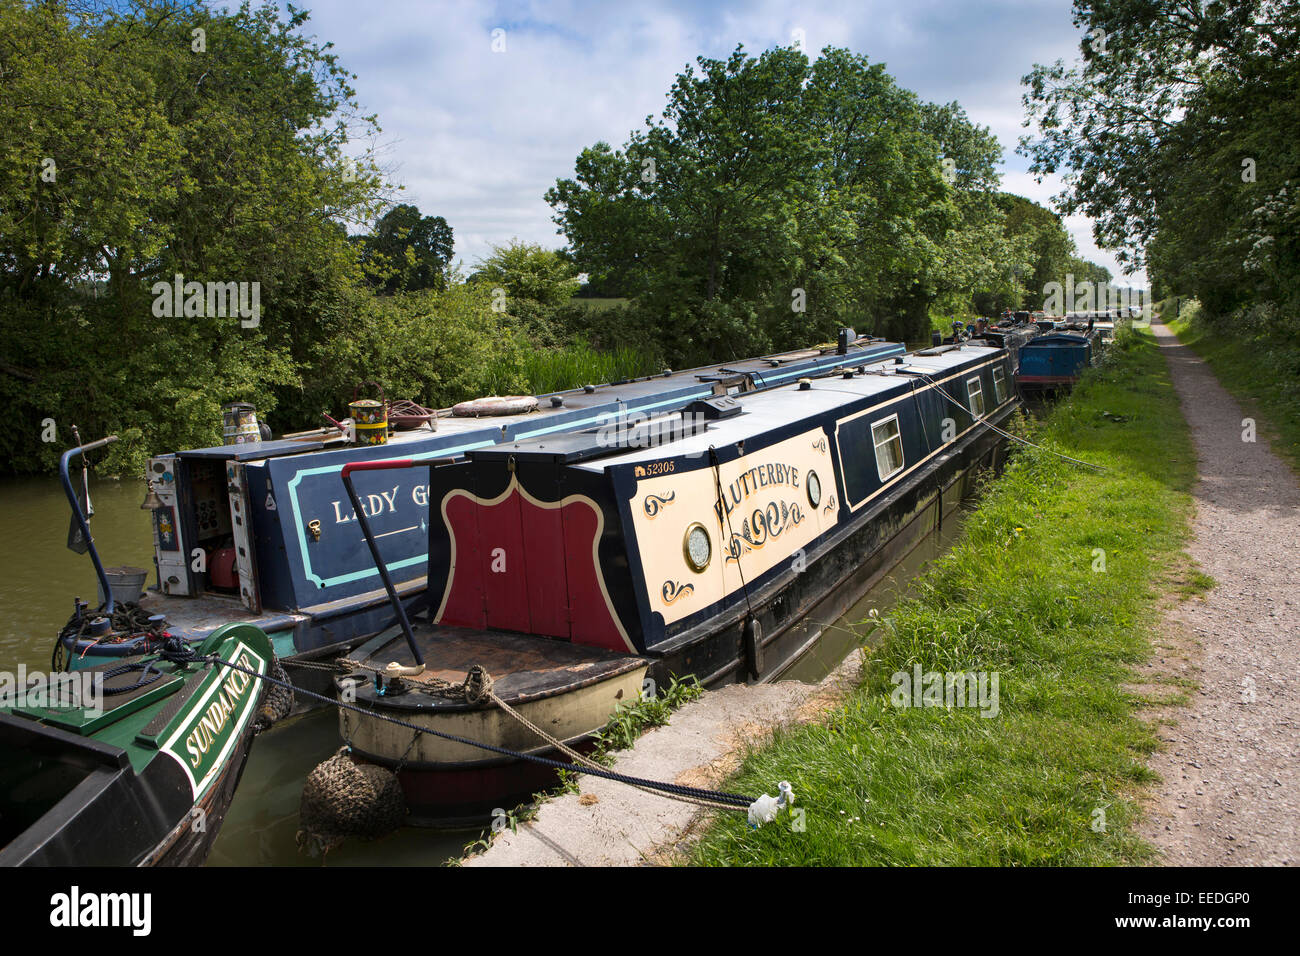 UK, England, Wiltshire, Pewsey Wharf, residential narrowboats moored on Kennett and Avon Canal Stock Photo